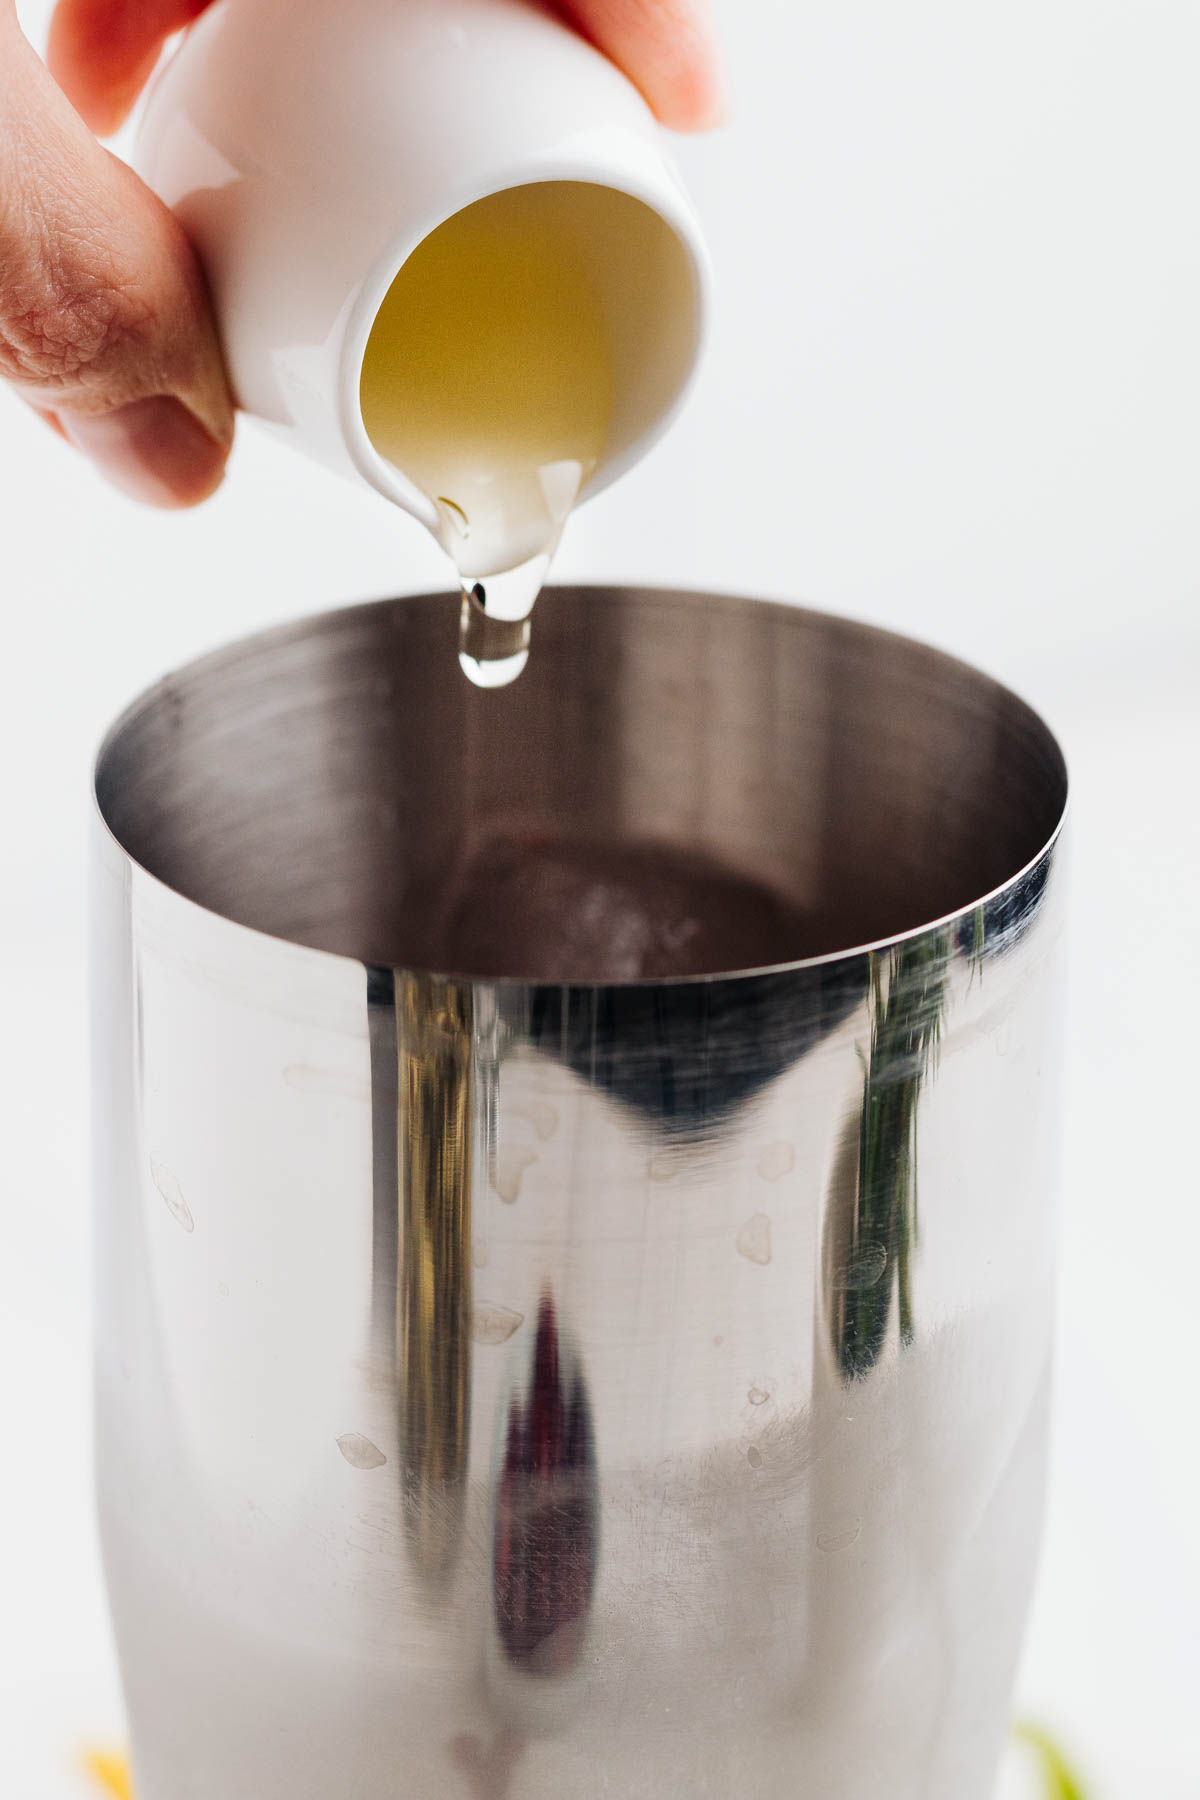 A silver colored cocktail shaker with a light colored syrup liquid being poured in.